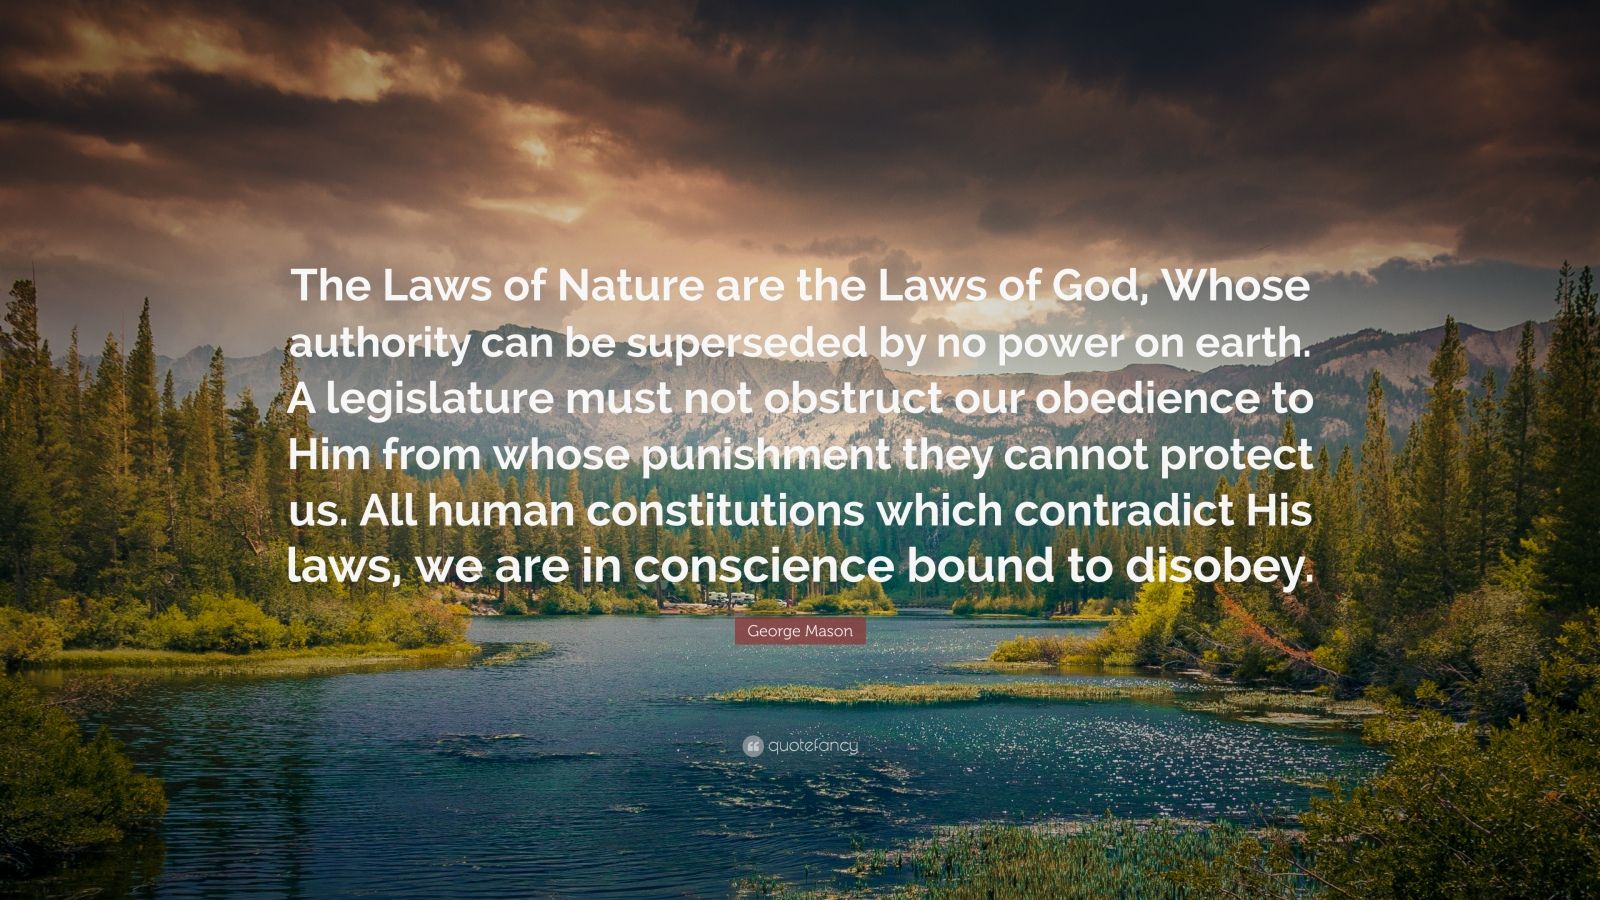 George Mason Quote: “The Laws of Nature are the Laws of God, Whose